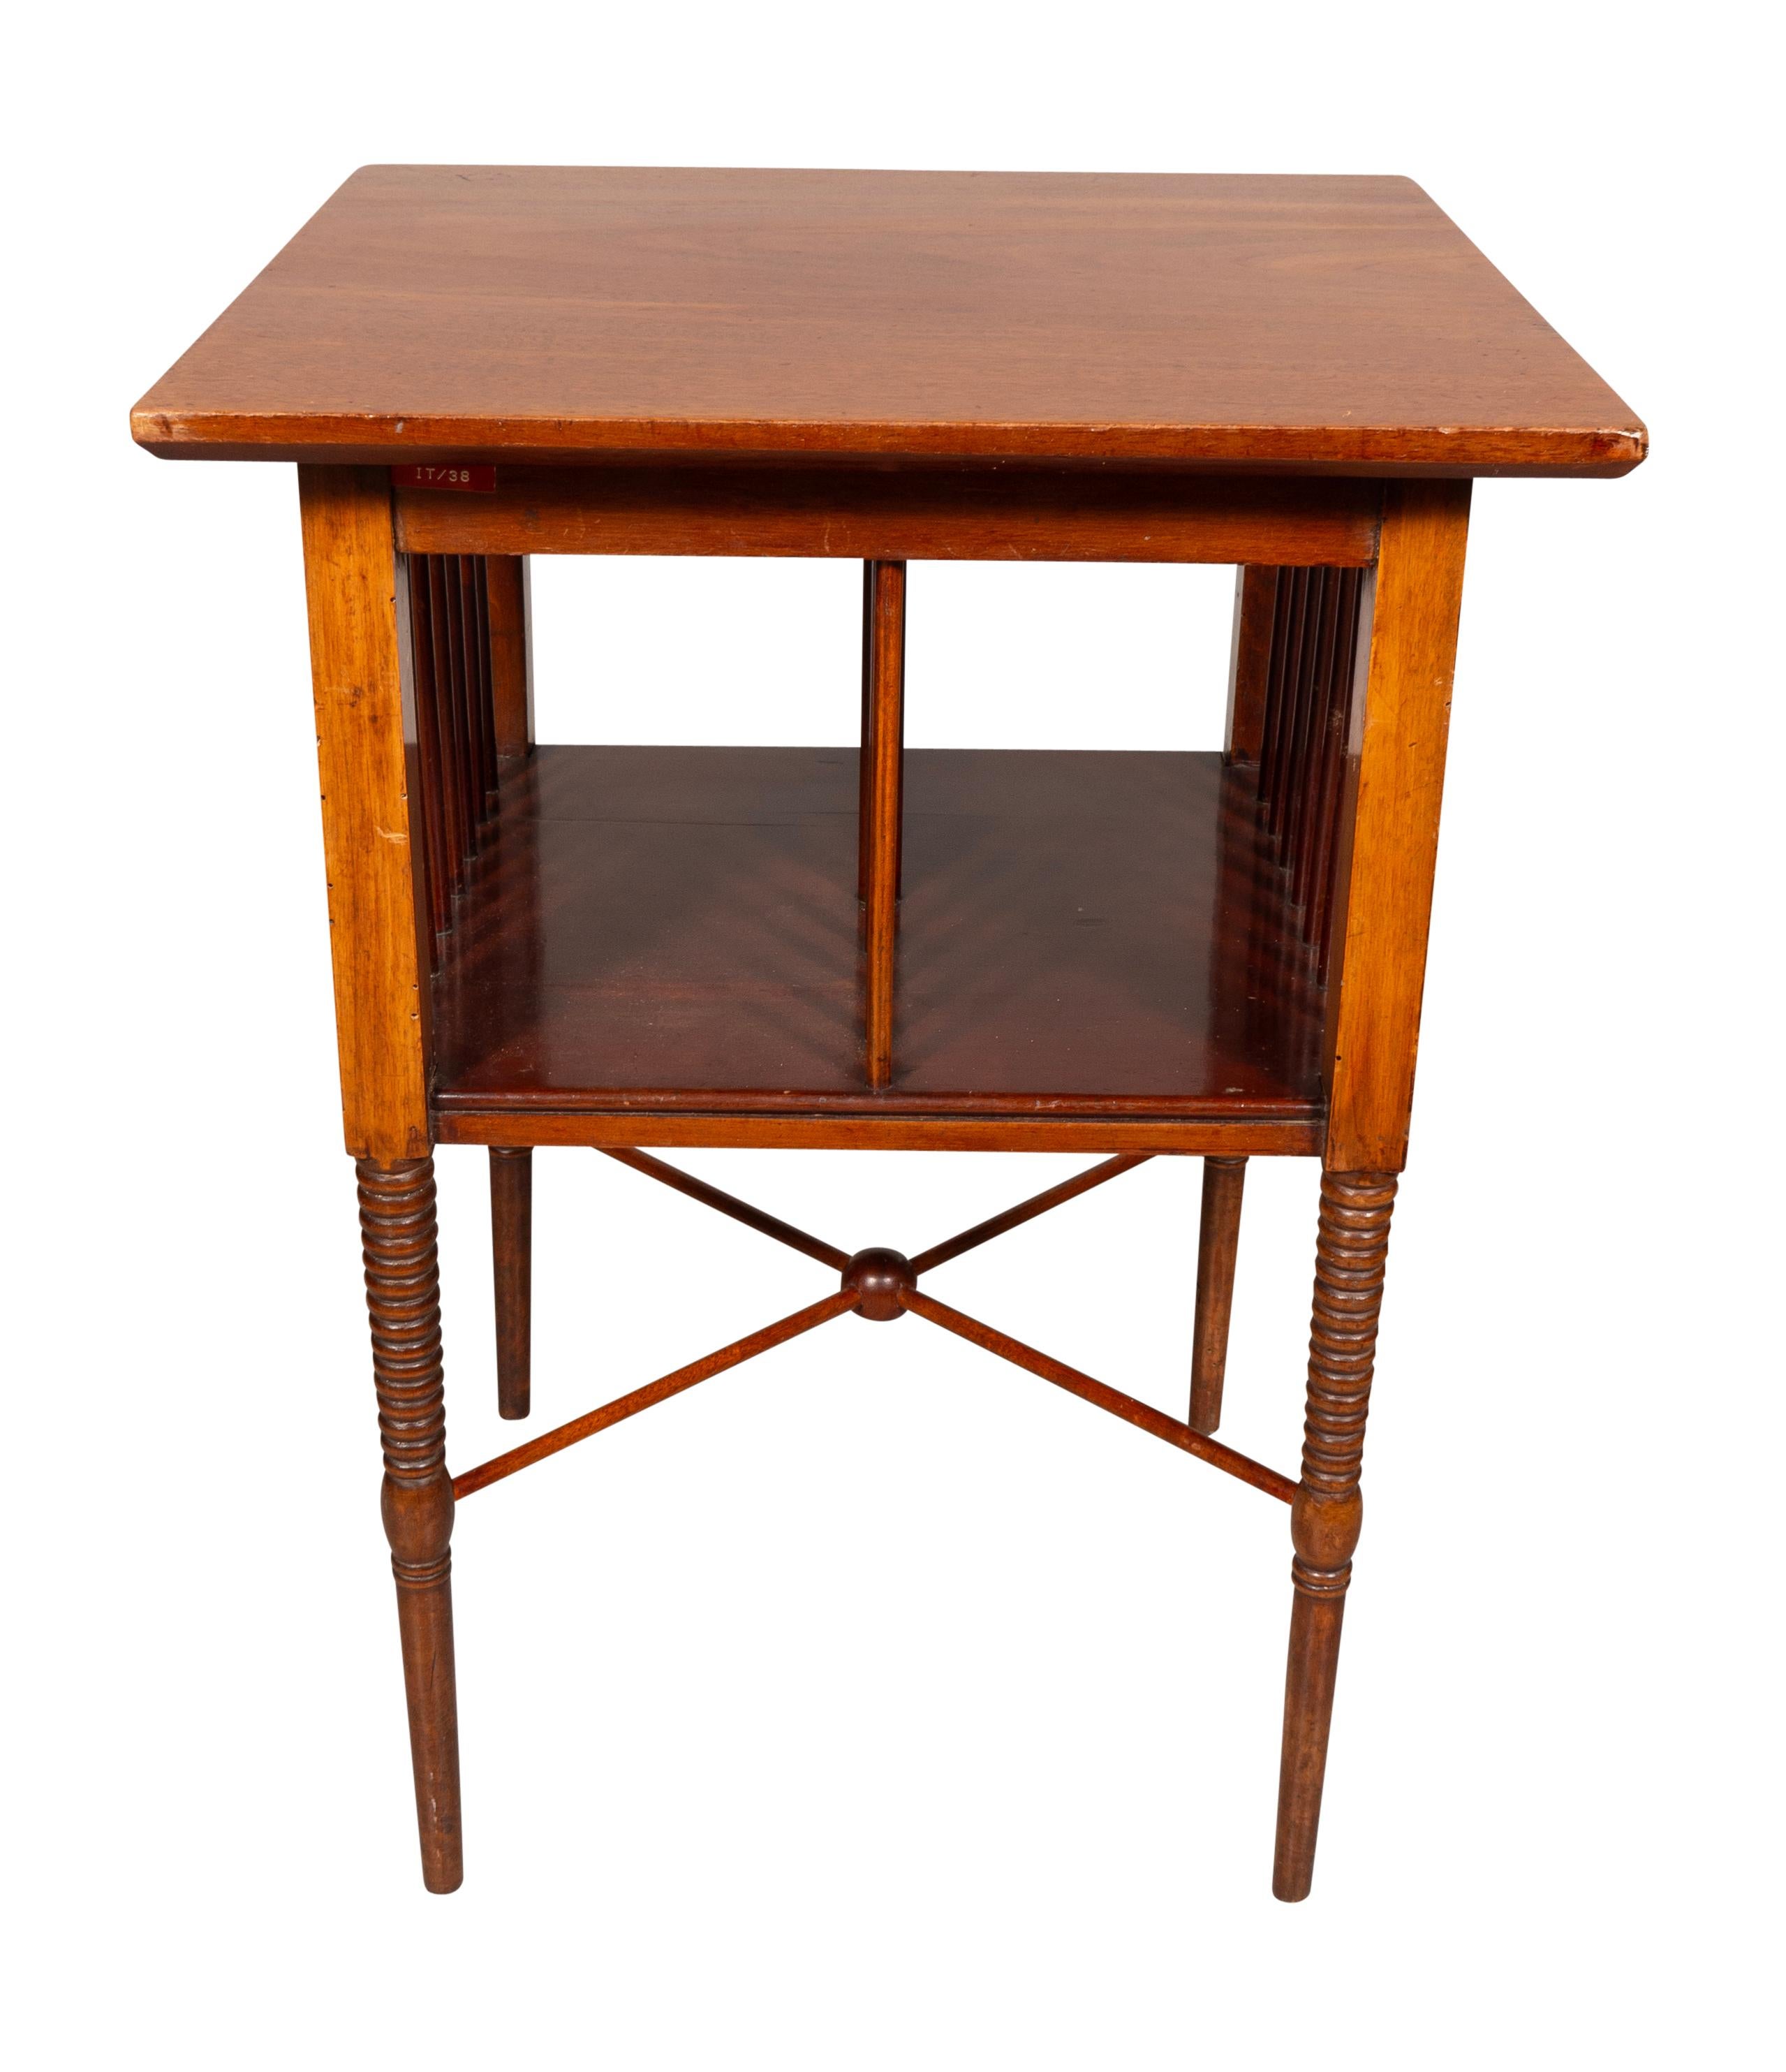 Aesthetic Movement English Aesthetic Mahogany Table Attributed To Godwin For Sale